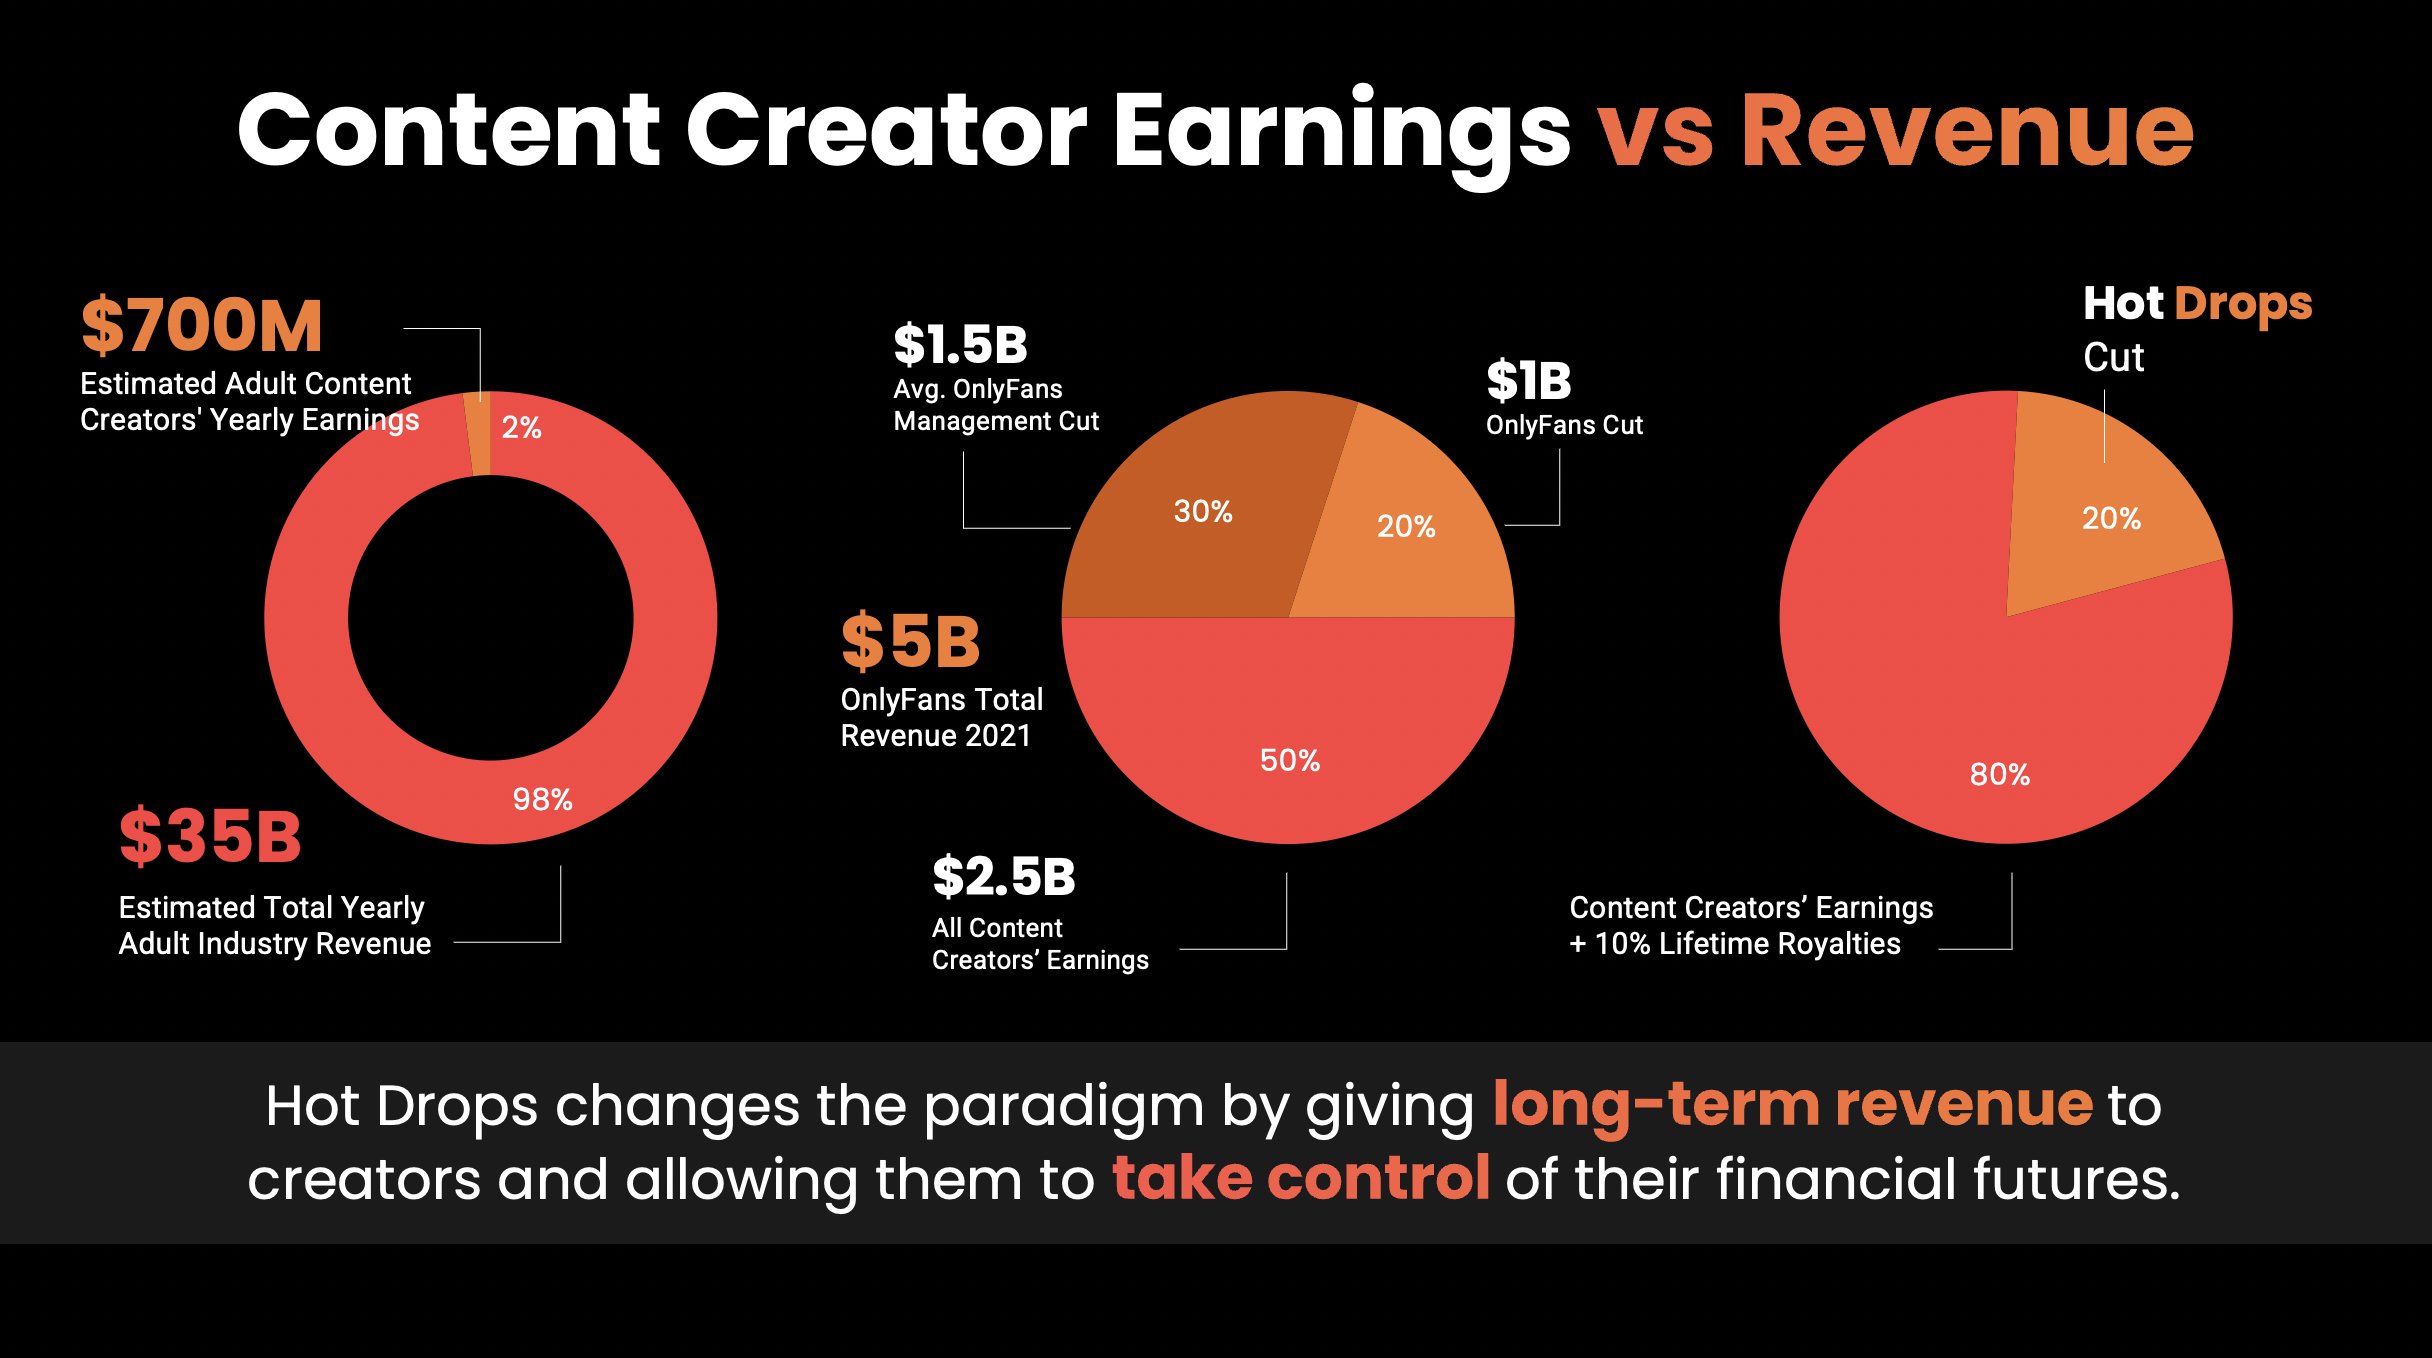 The picture shows hot drops chart about content creator revenue